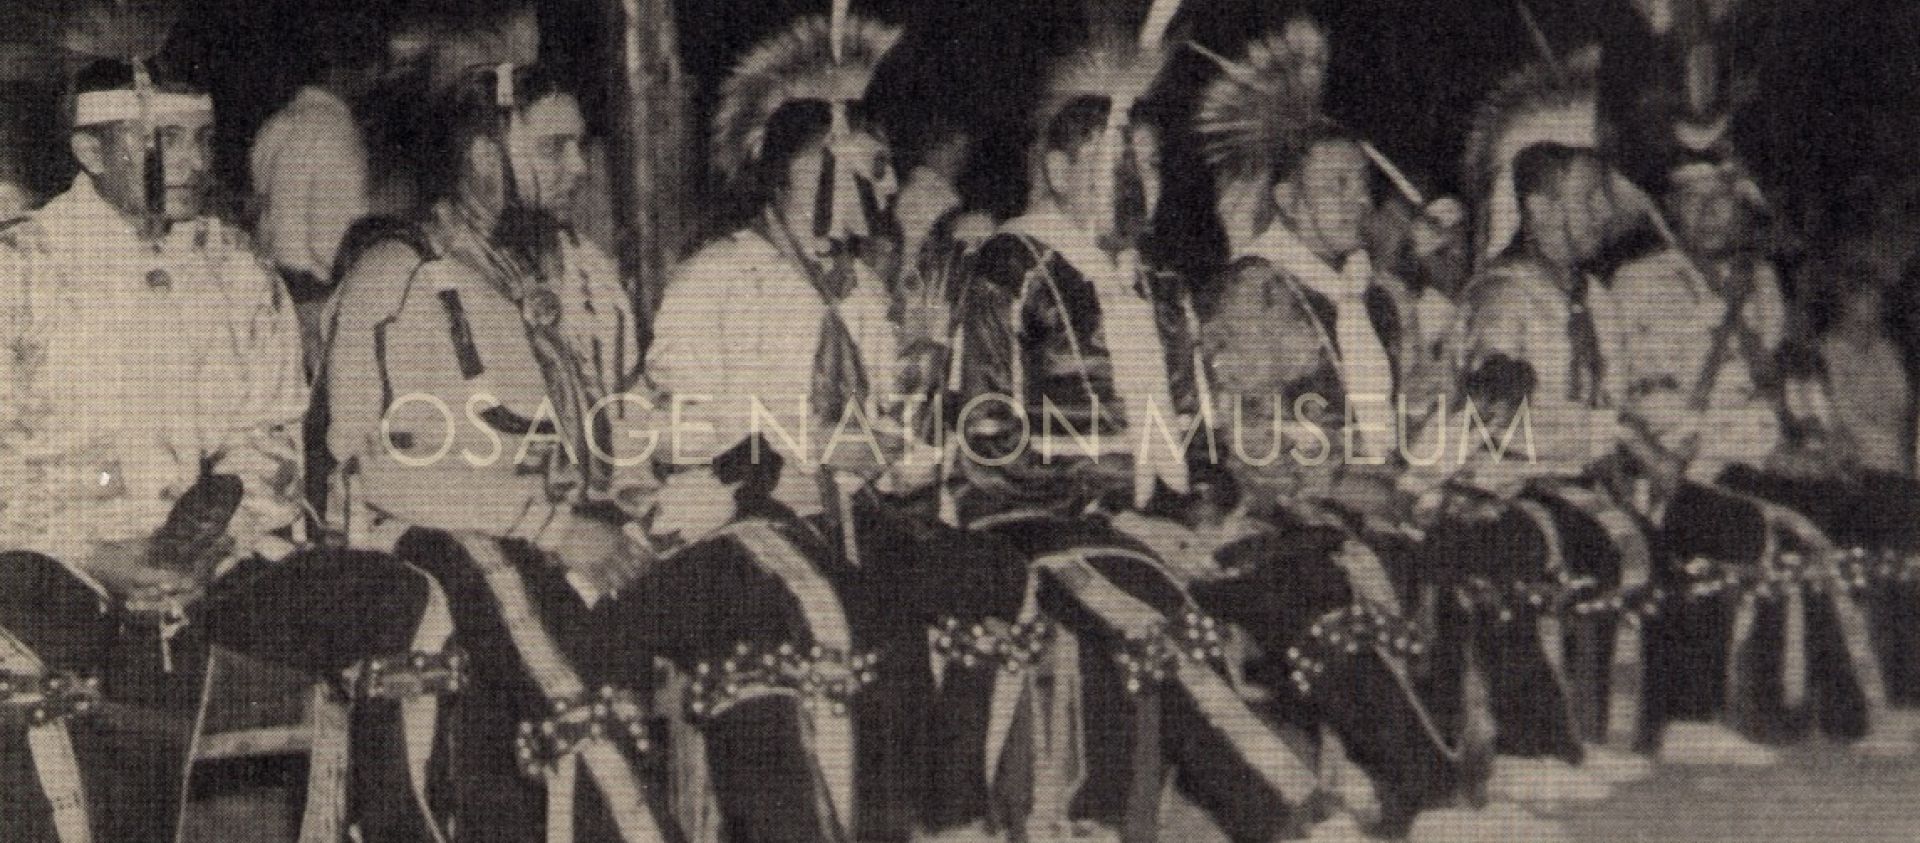 An important component of the June dances are the bells such as those worn by the following men seated under the dance arbor, L-R: Ed Beartrack, Francis Drexil, Jamison Bear Jr., Harold West, Clem Mason, Archie Mason, Ed Red Eagle.